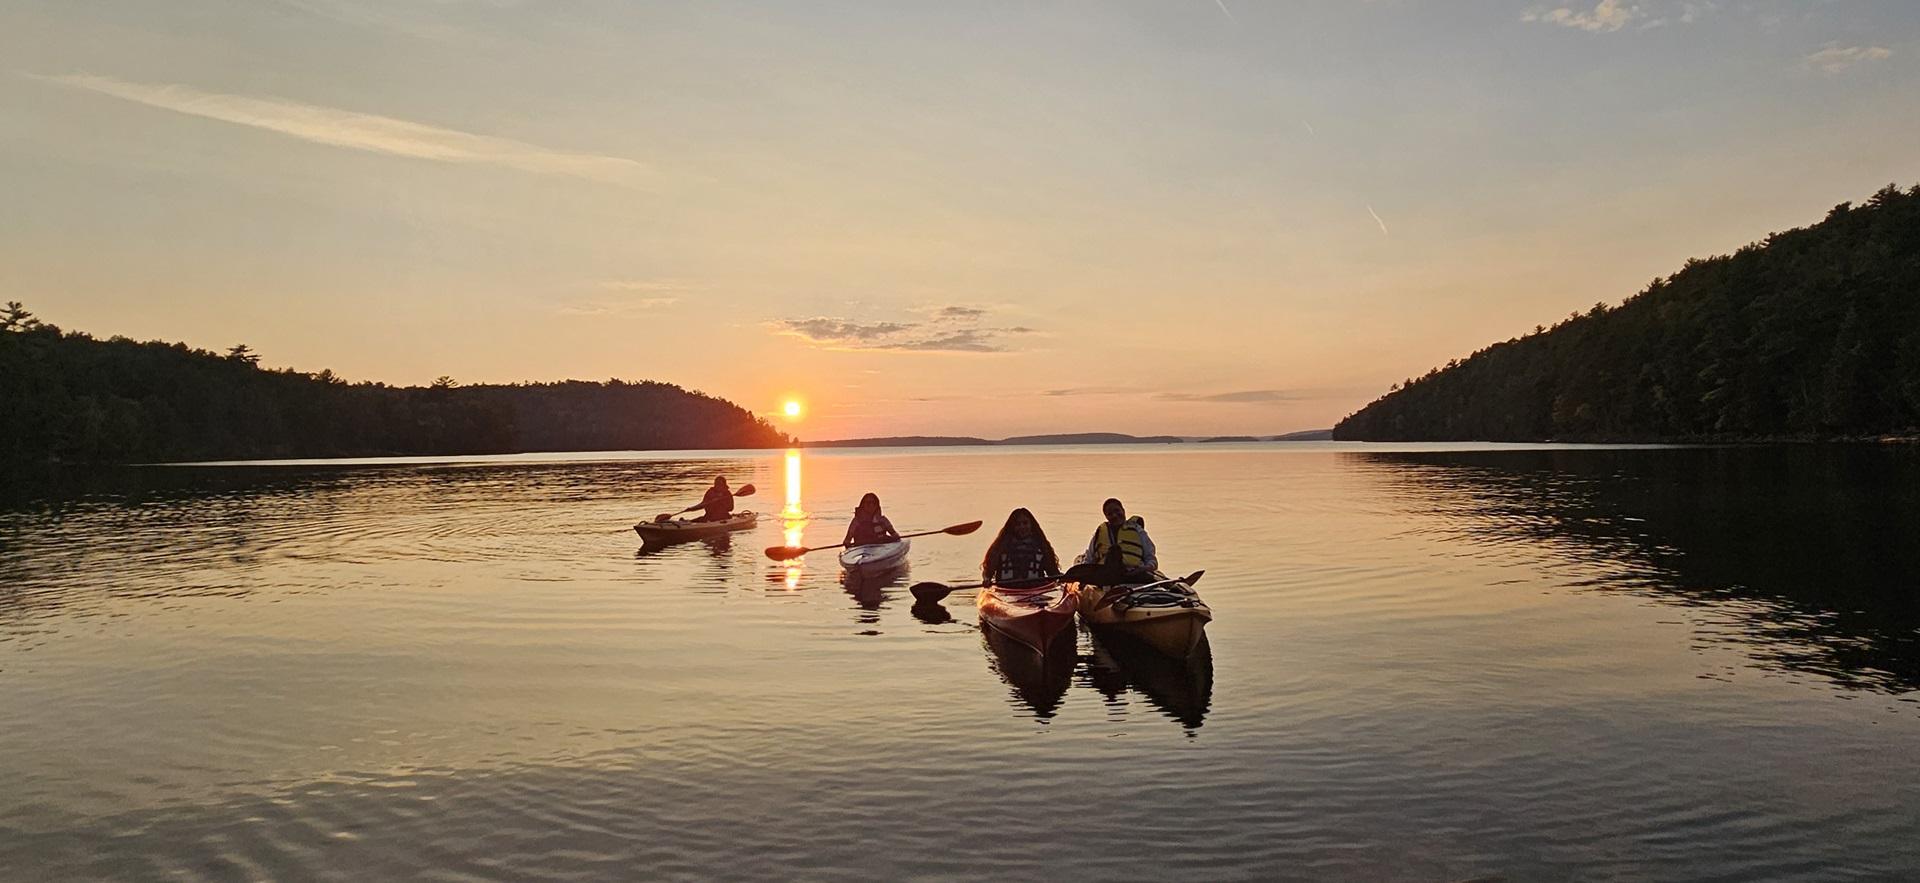 Adventure Rec students in kayaks on the lake during sunset